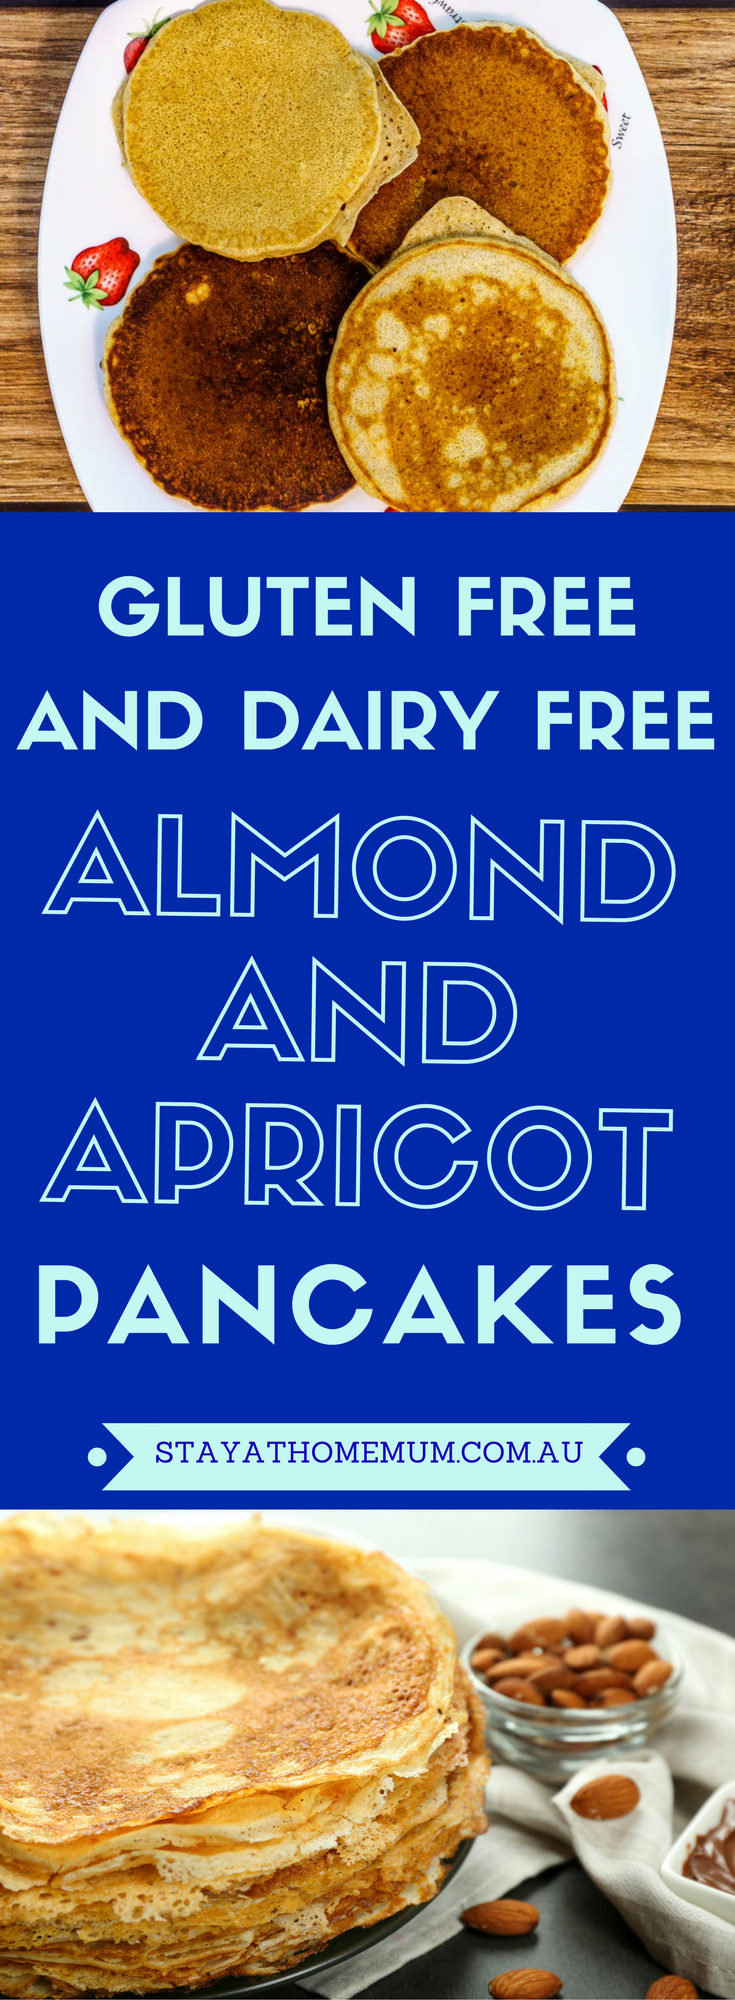 Gluten Free and Dairy Free Almond and Apricot Pancakes | Stay At Home Mum